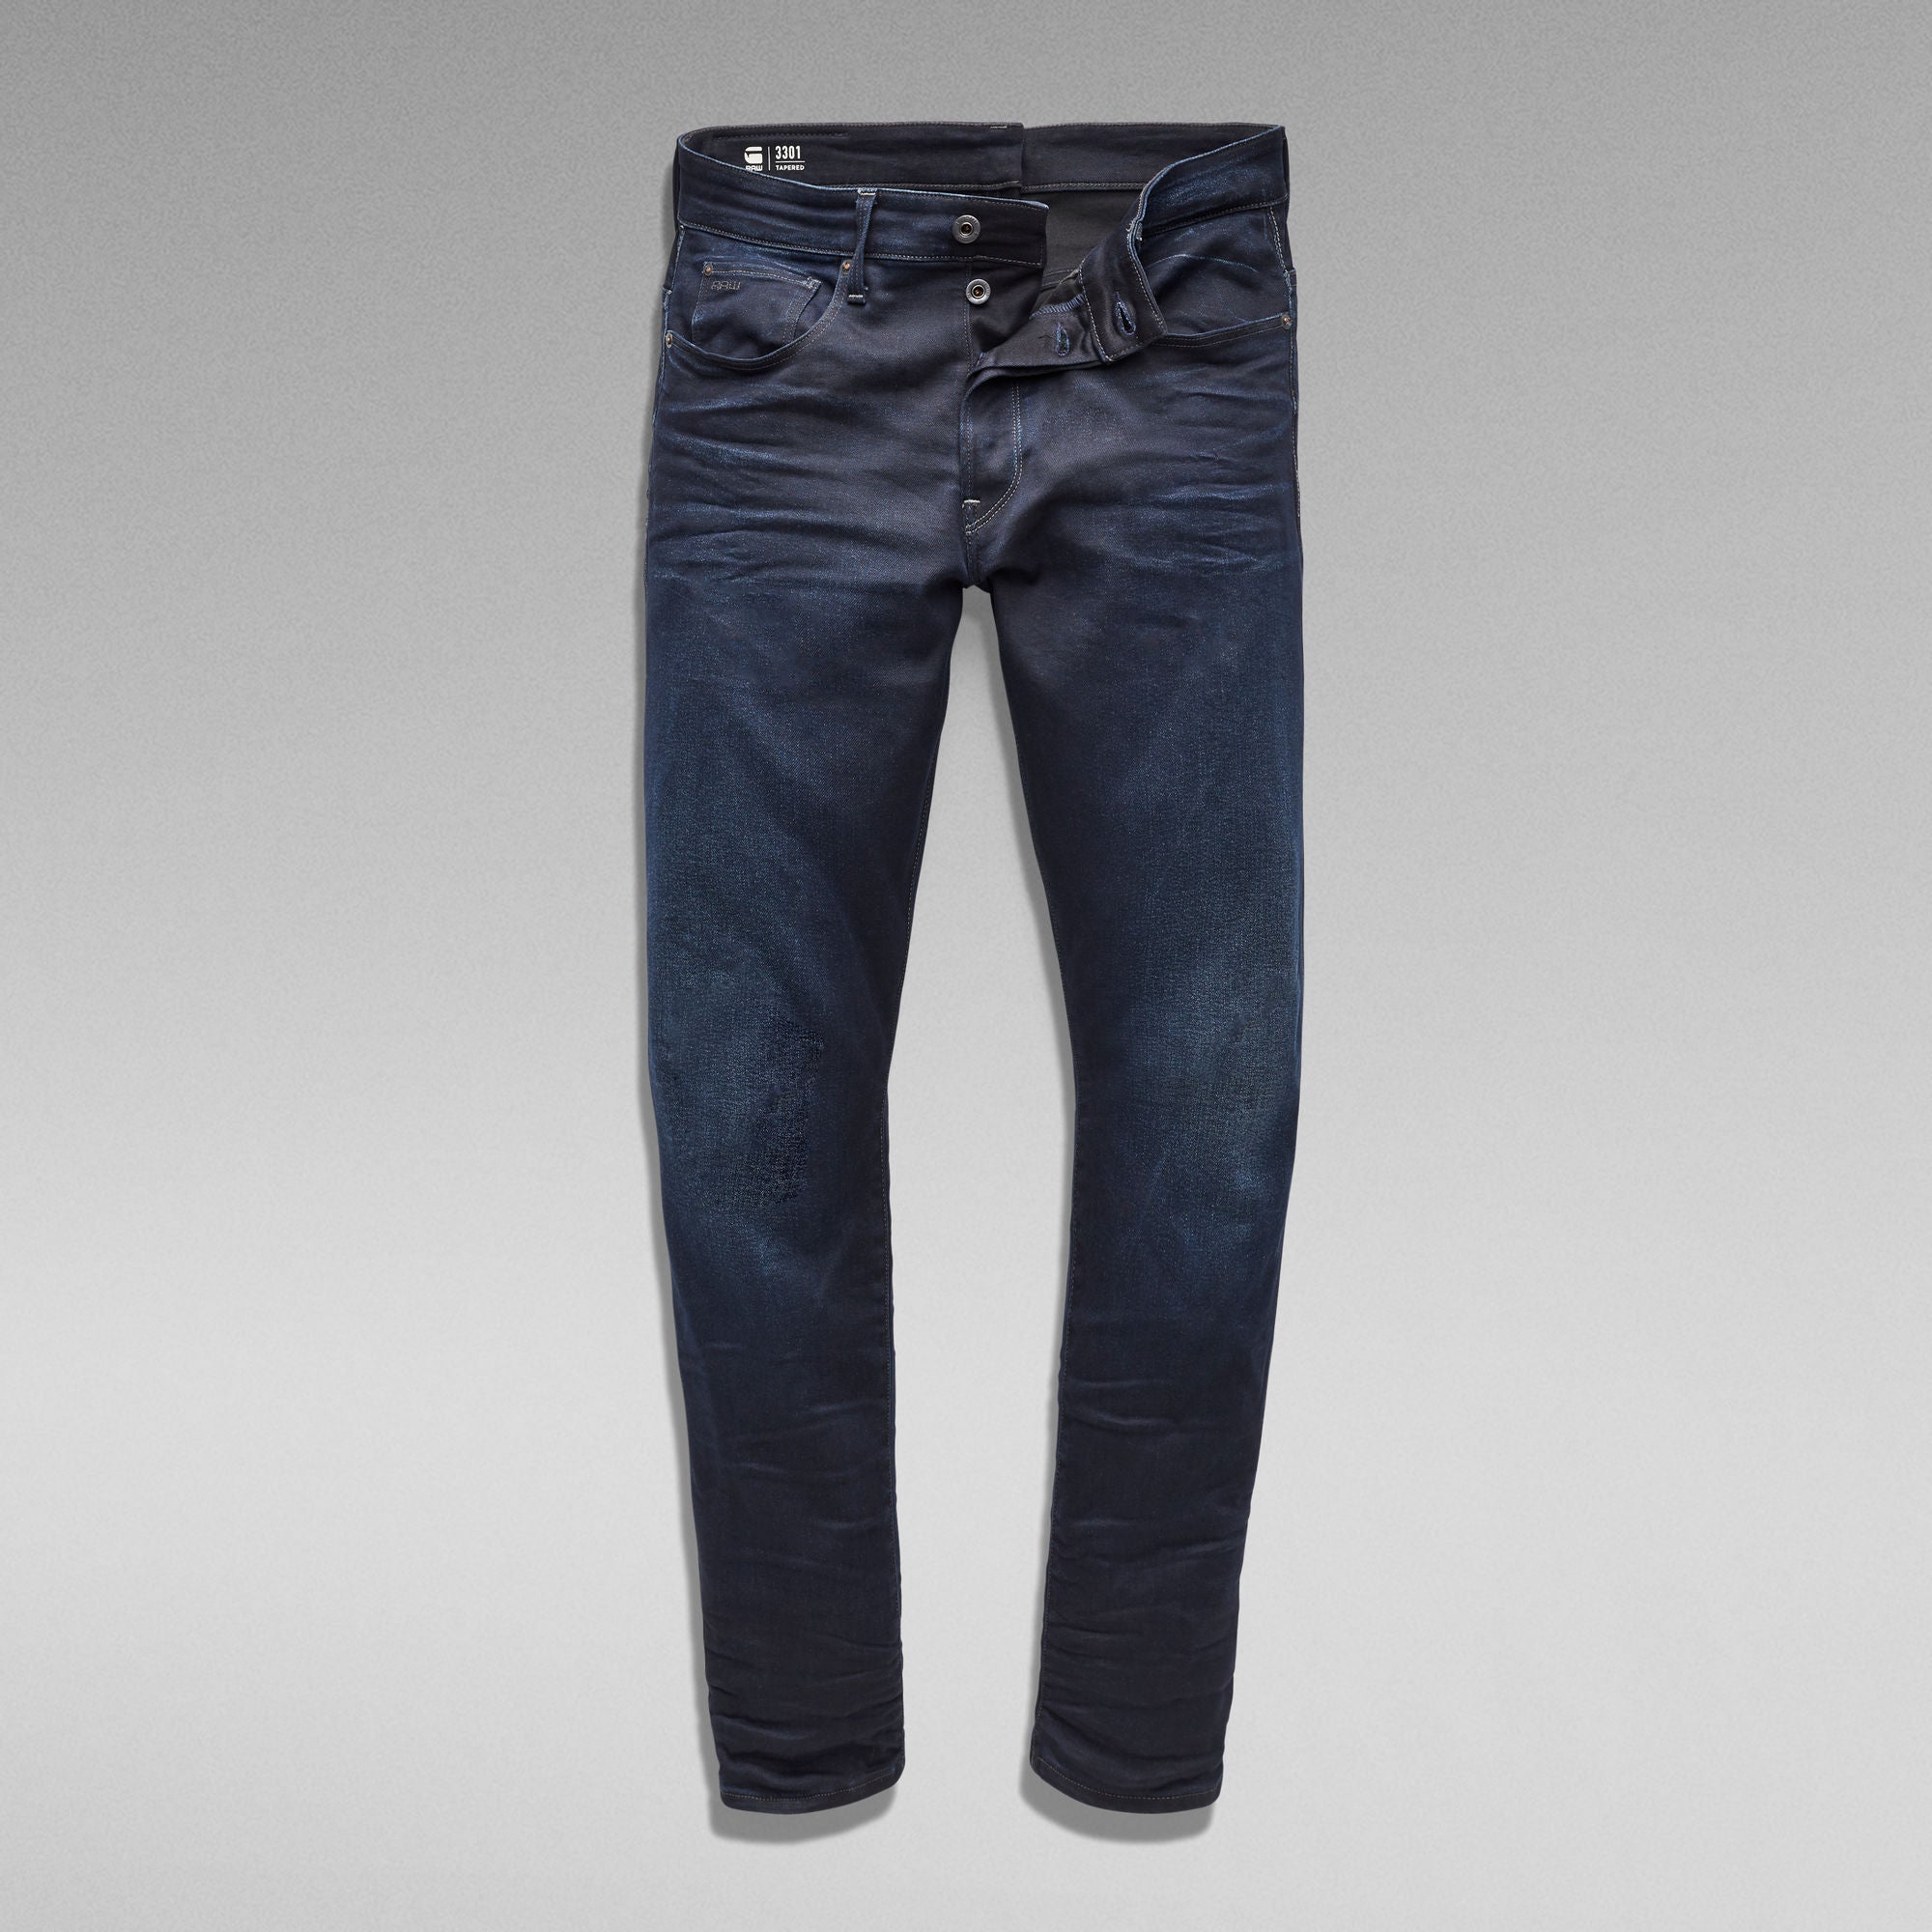 G-Star Raw - 3301 Straight Tapered Jeans - Dk Aged 70%